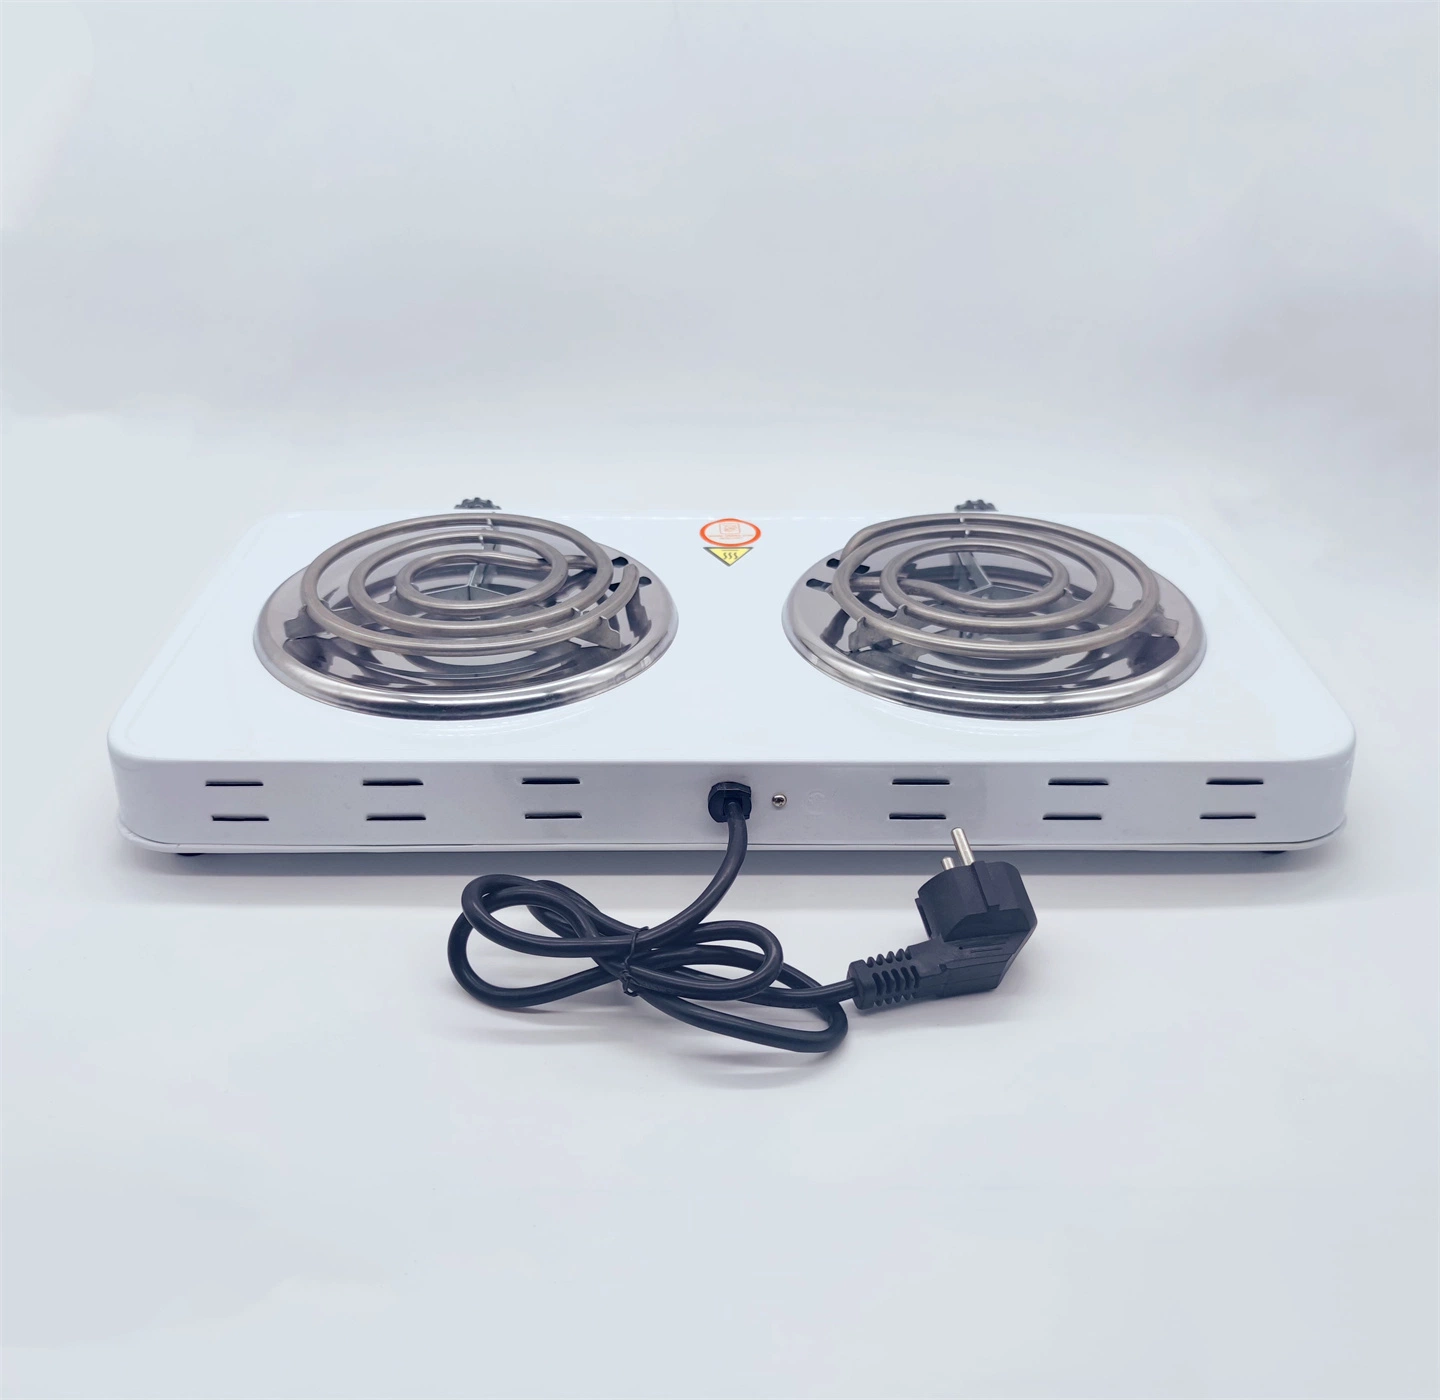 Cast Iron Stainless Steel Heating Plate Heater Electric Stove Cooking with Cheap Price